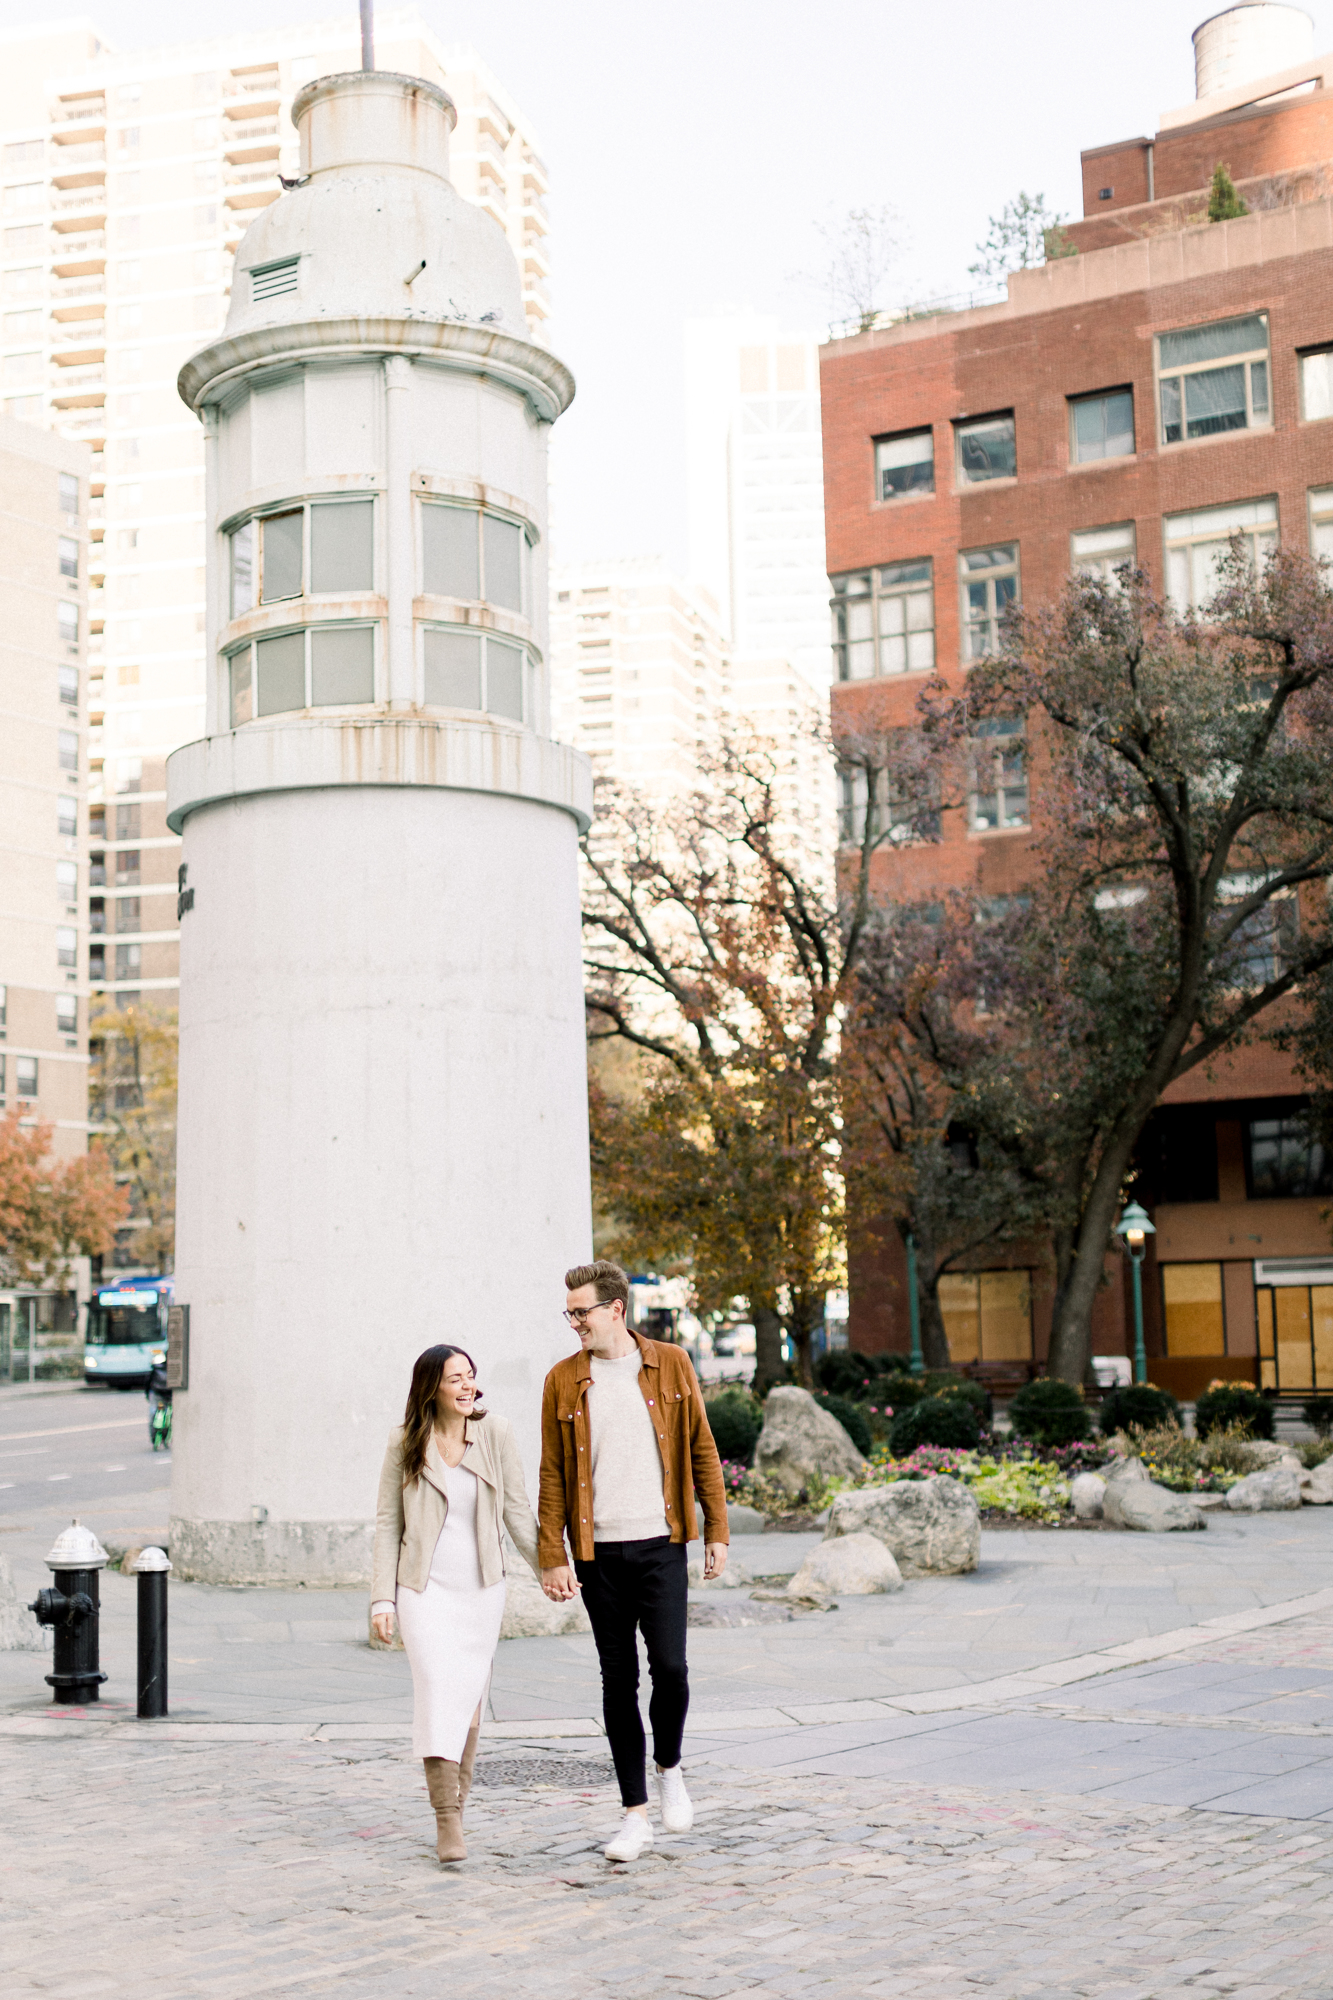 Adorable Fall Engagement Photos on South Street Near New York's Pier 17